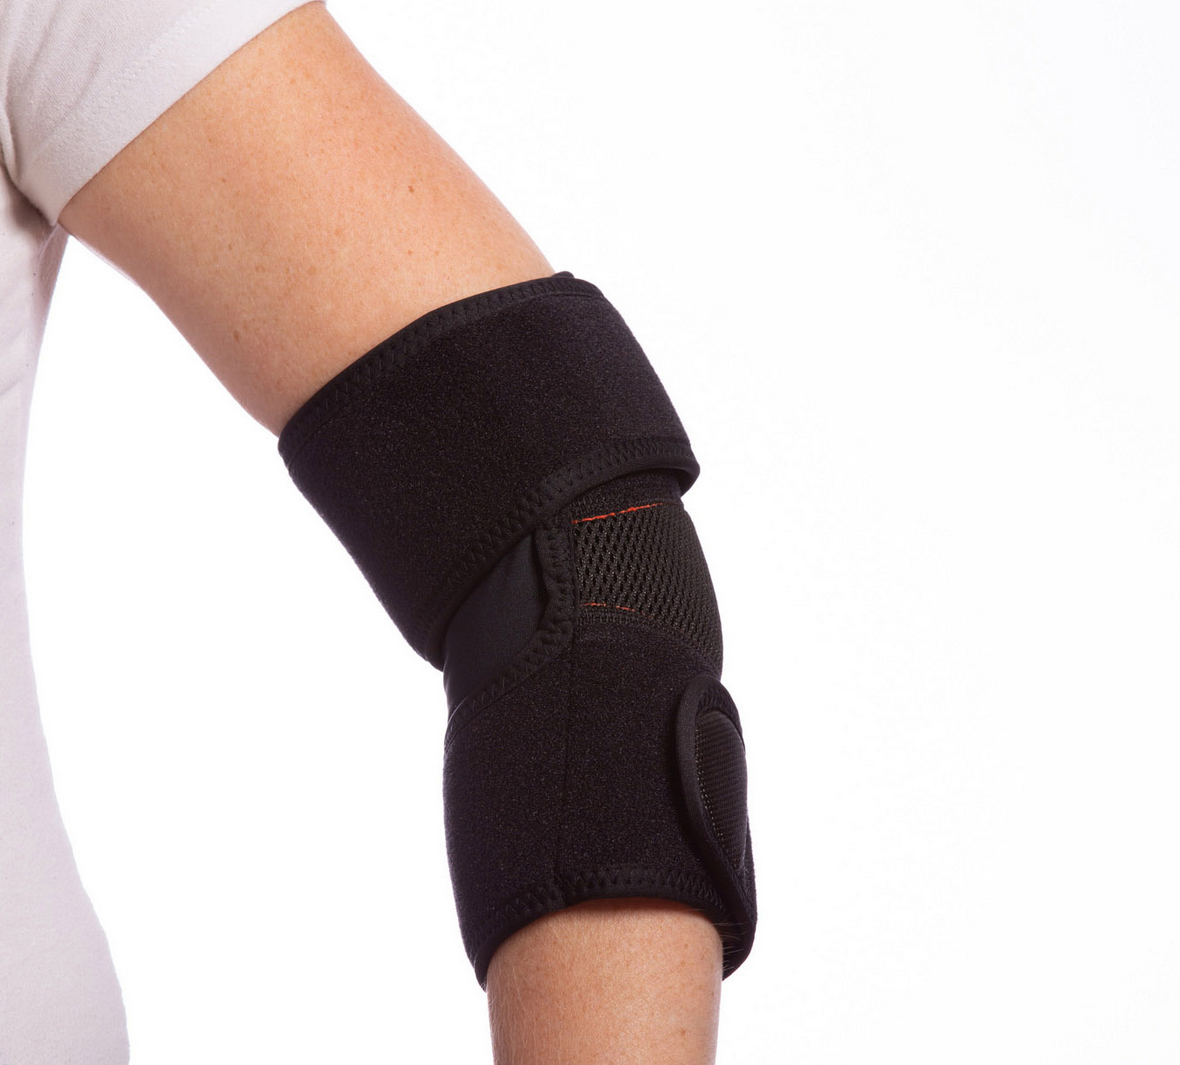 Elbow Wrap Aids in Elbow Injuries | Art in Aging